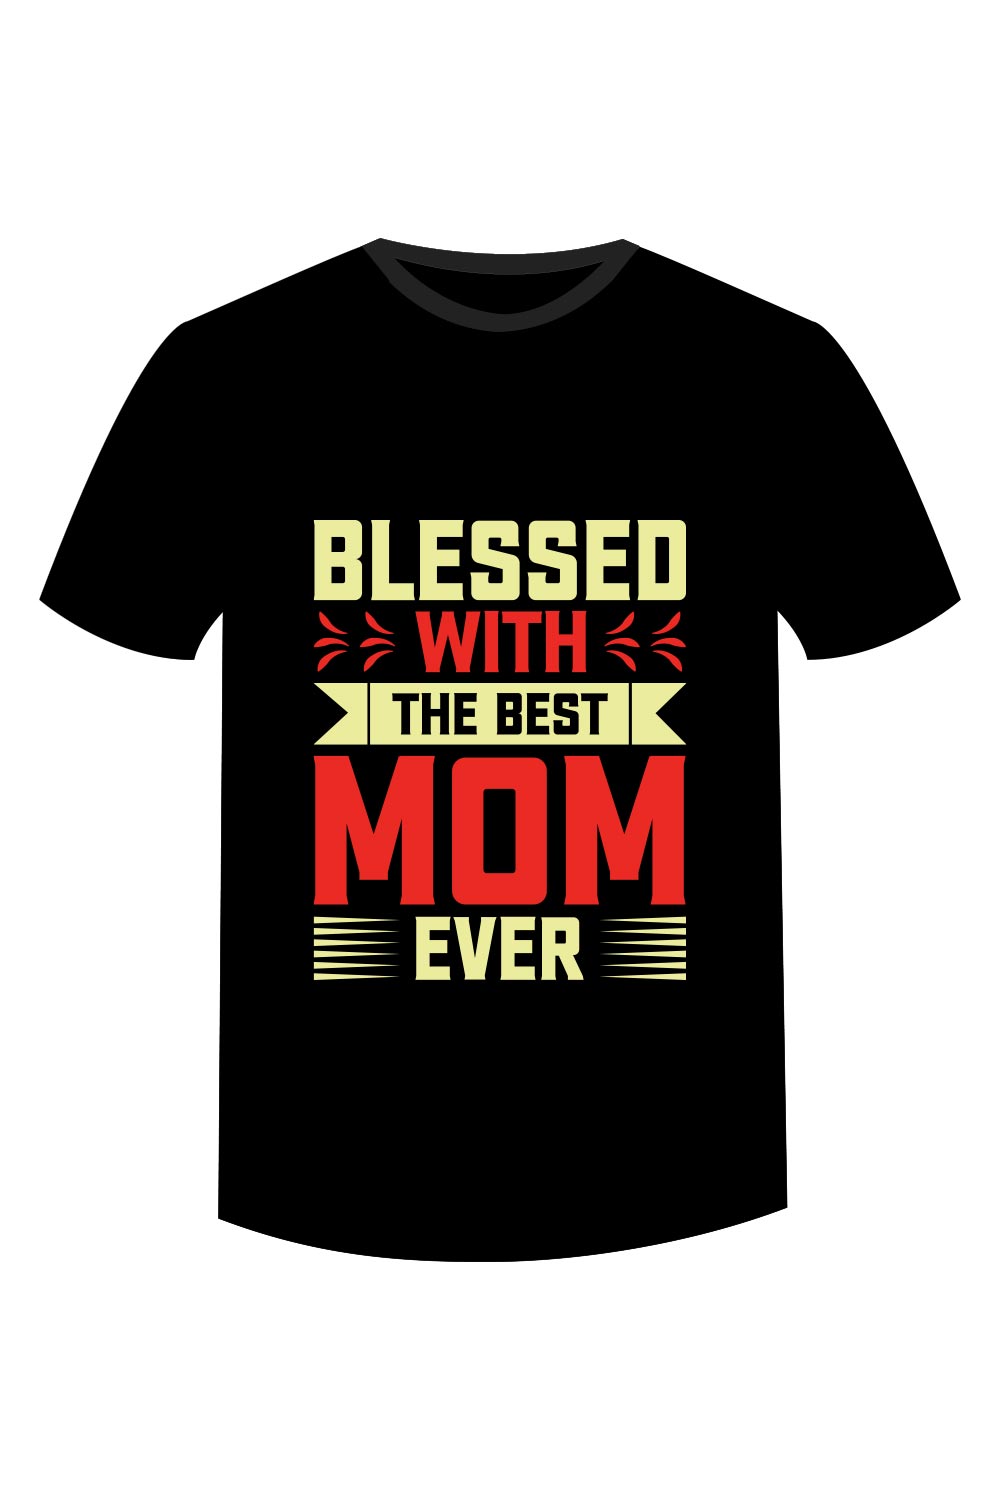 Mothers day t-shirt design pinterest preview image.